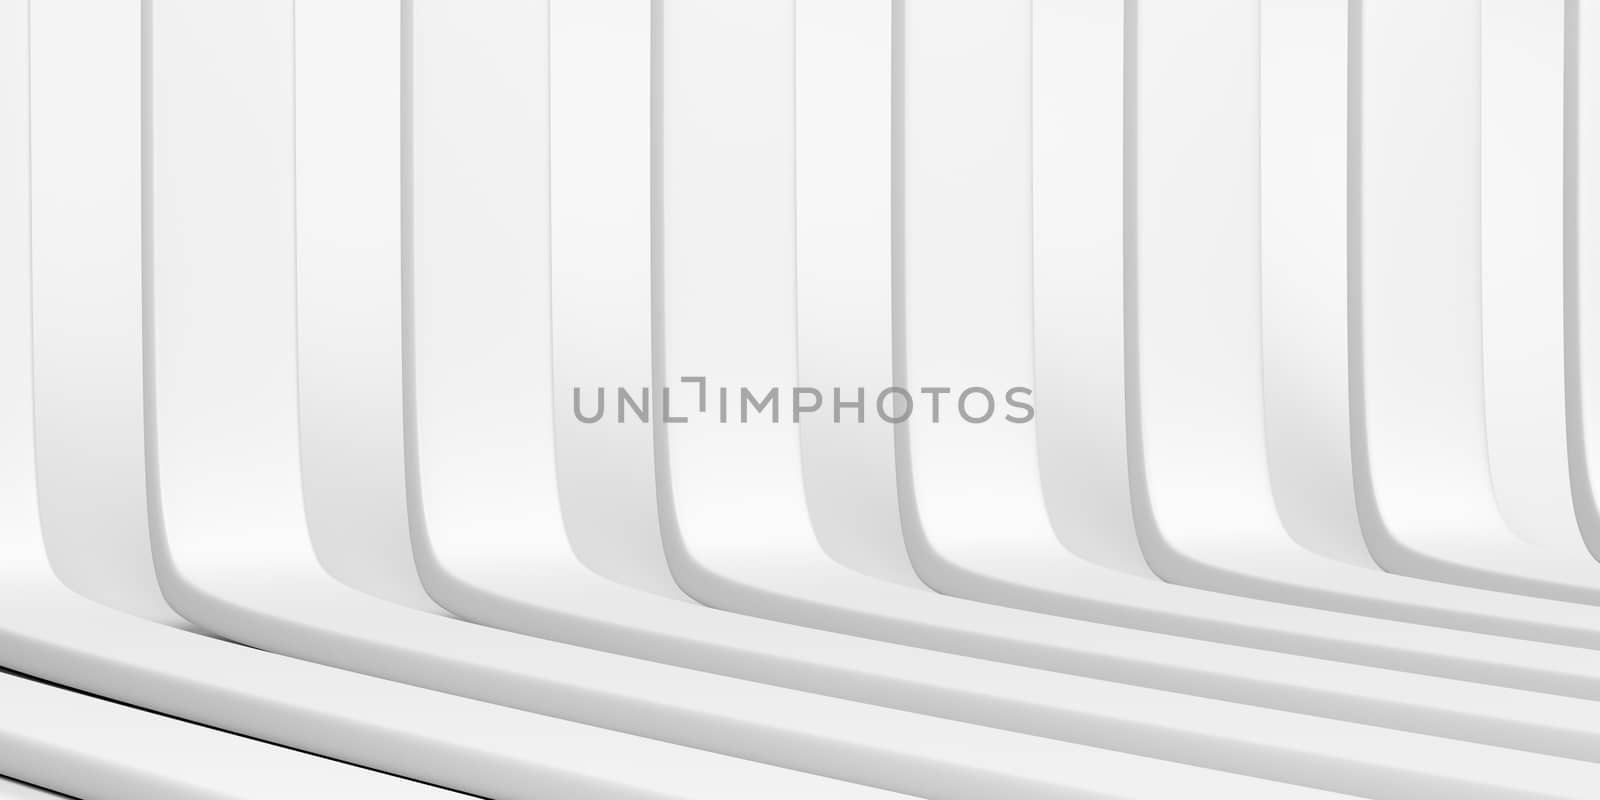 Abstract background with white plastic stripes, 3D illustration